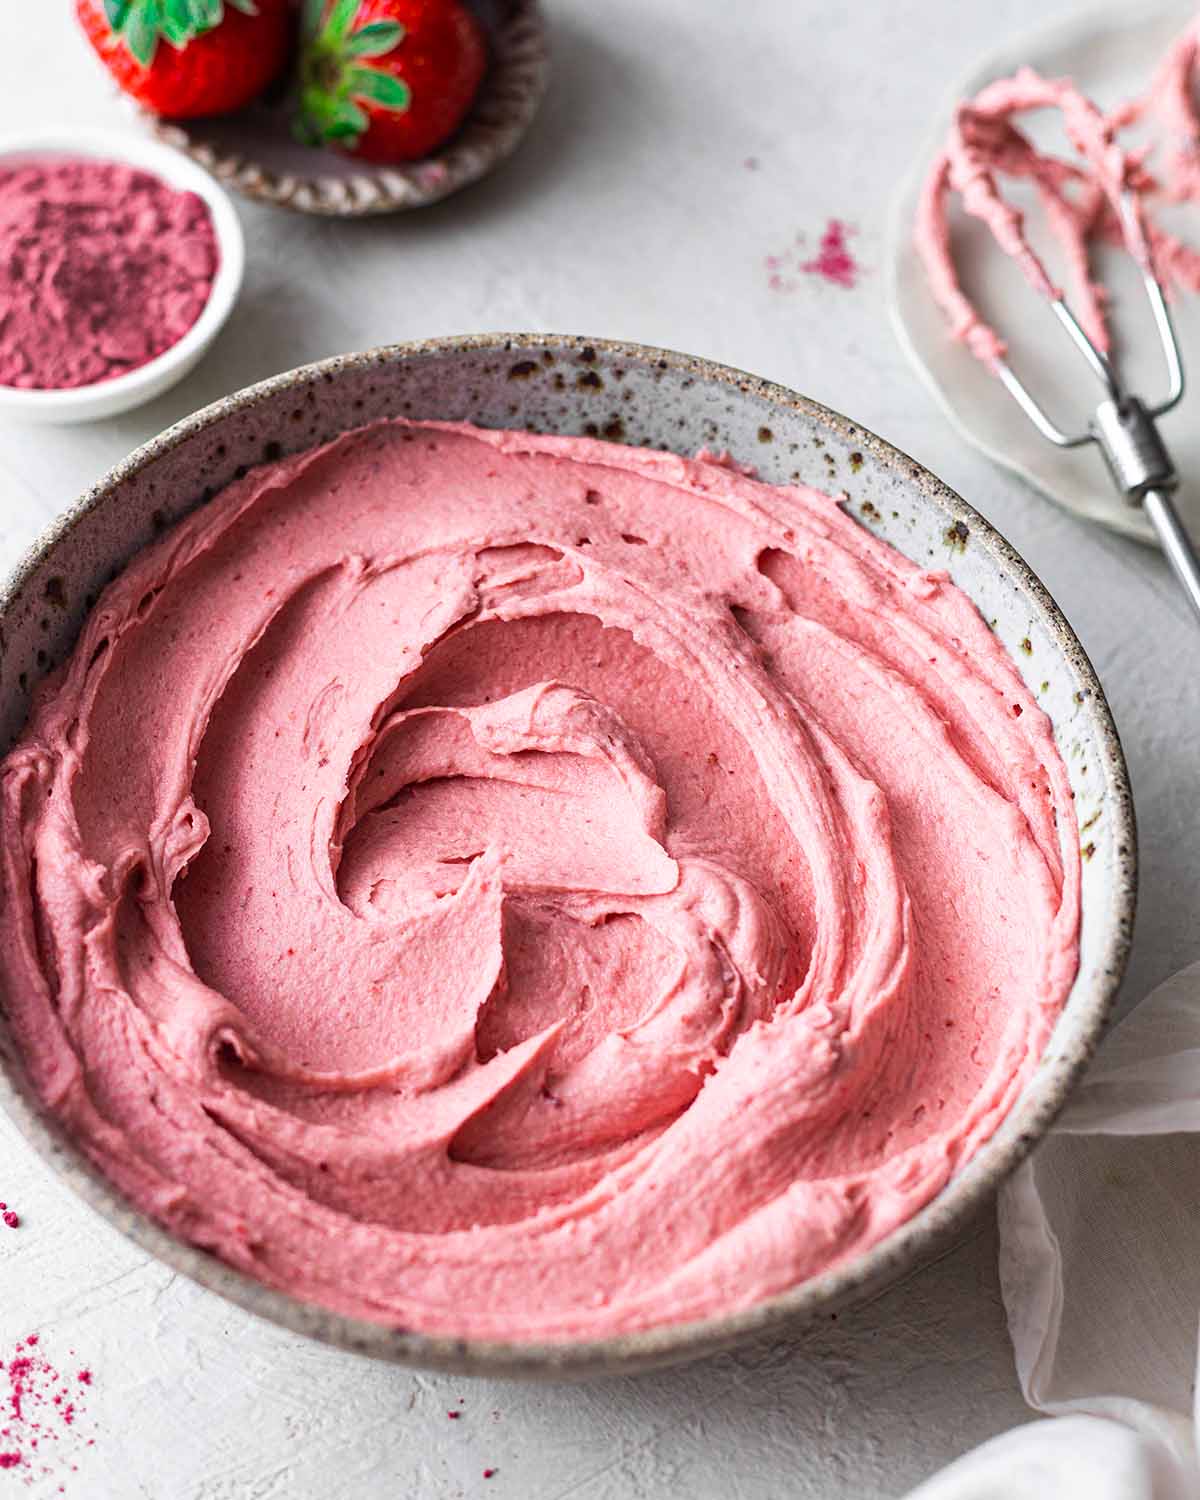 Bowl of creamy strawberry frosting with strawberry powder, fresh strawberries and hand beater whisk attachment in background.